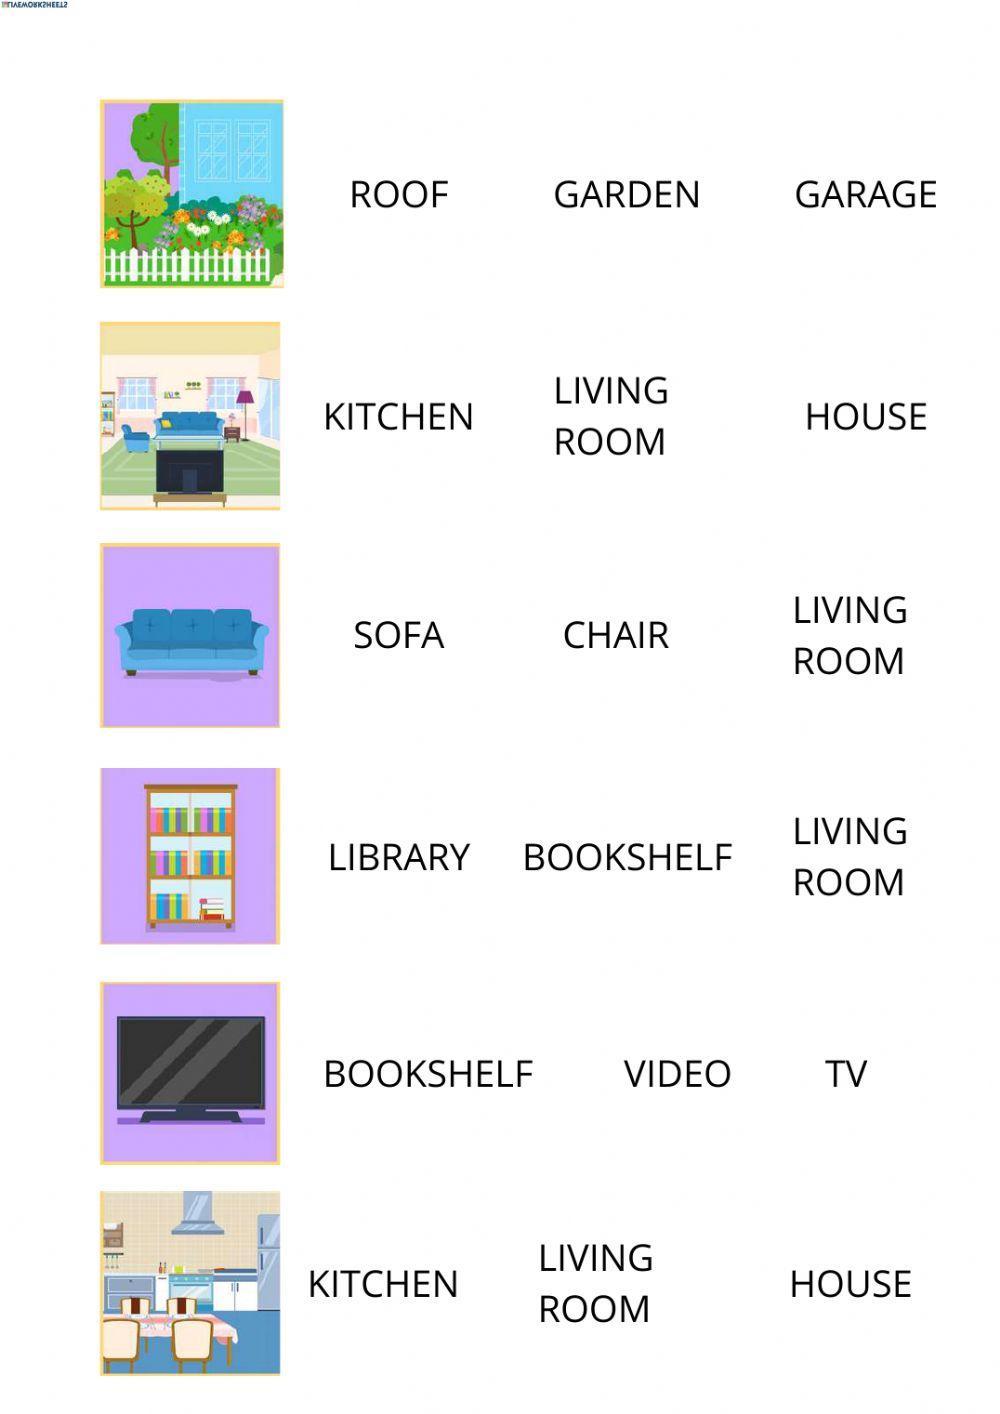 Parts of the house vocabulary